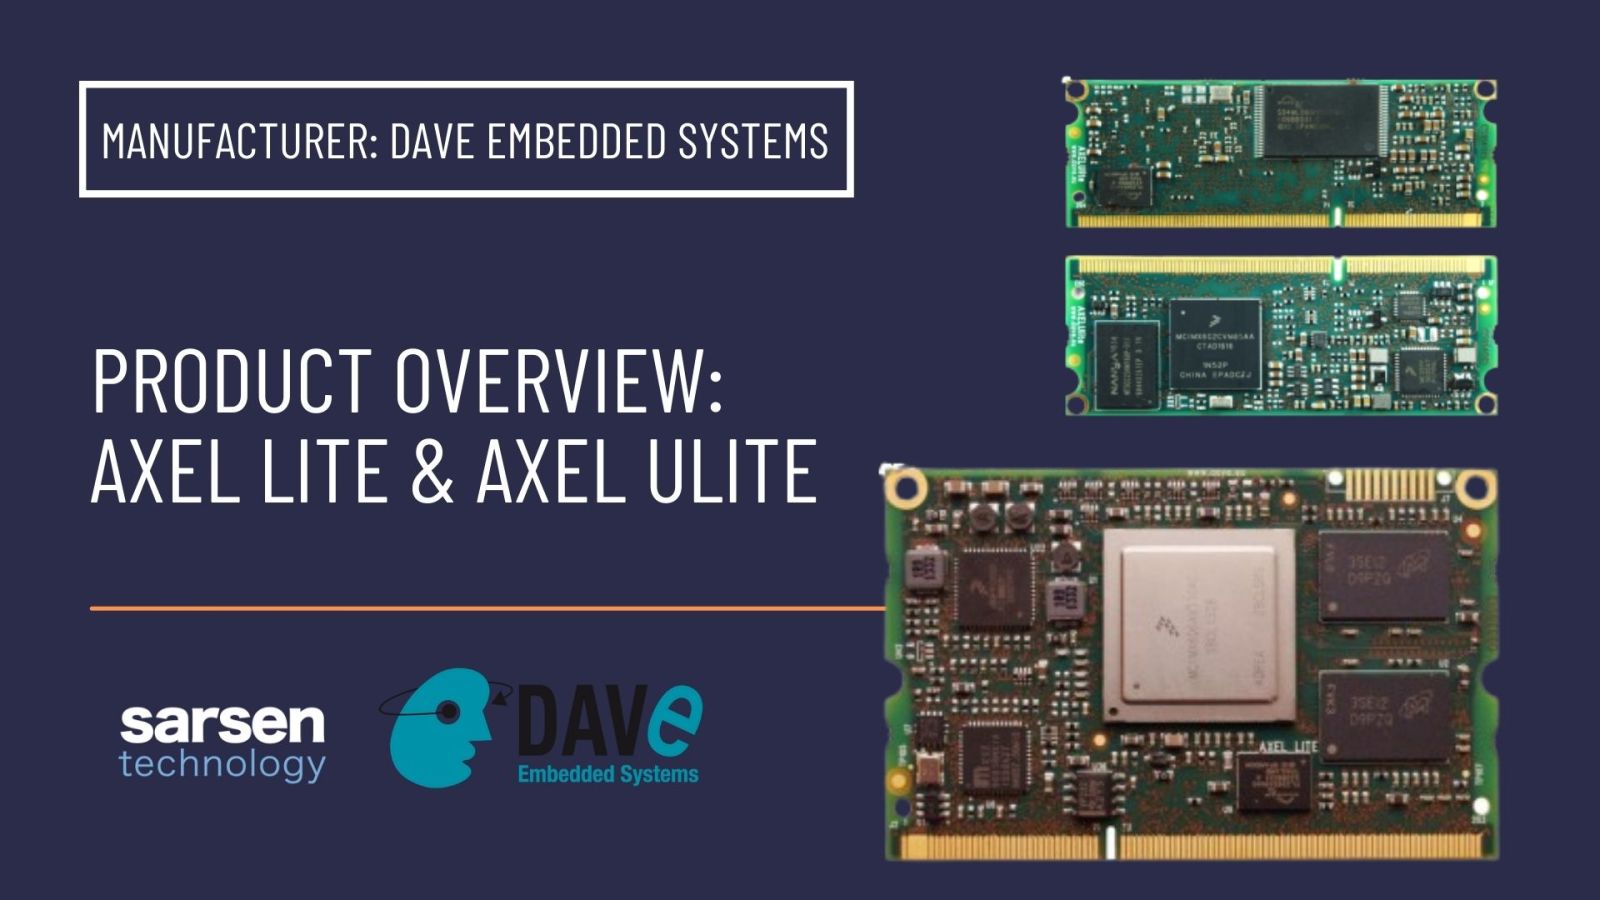 Dave Embedded Systems: AXEL Lite & ULite